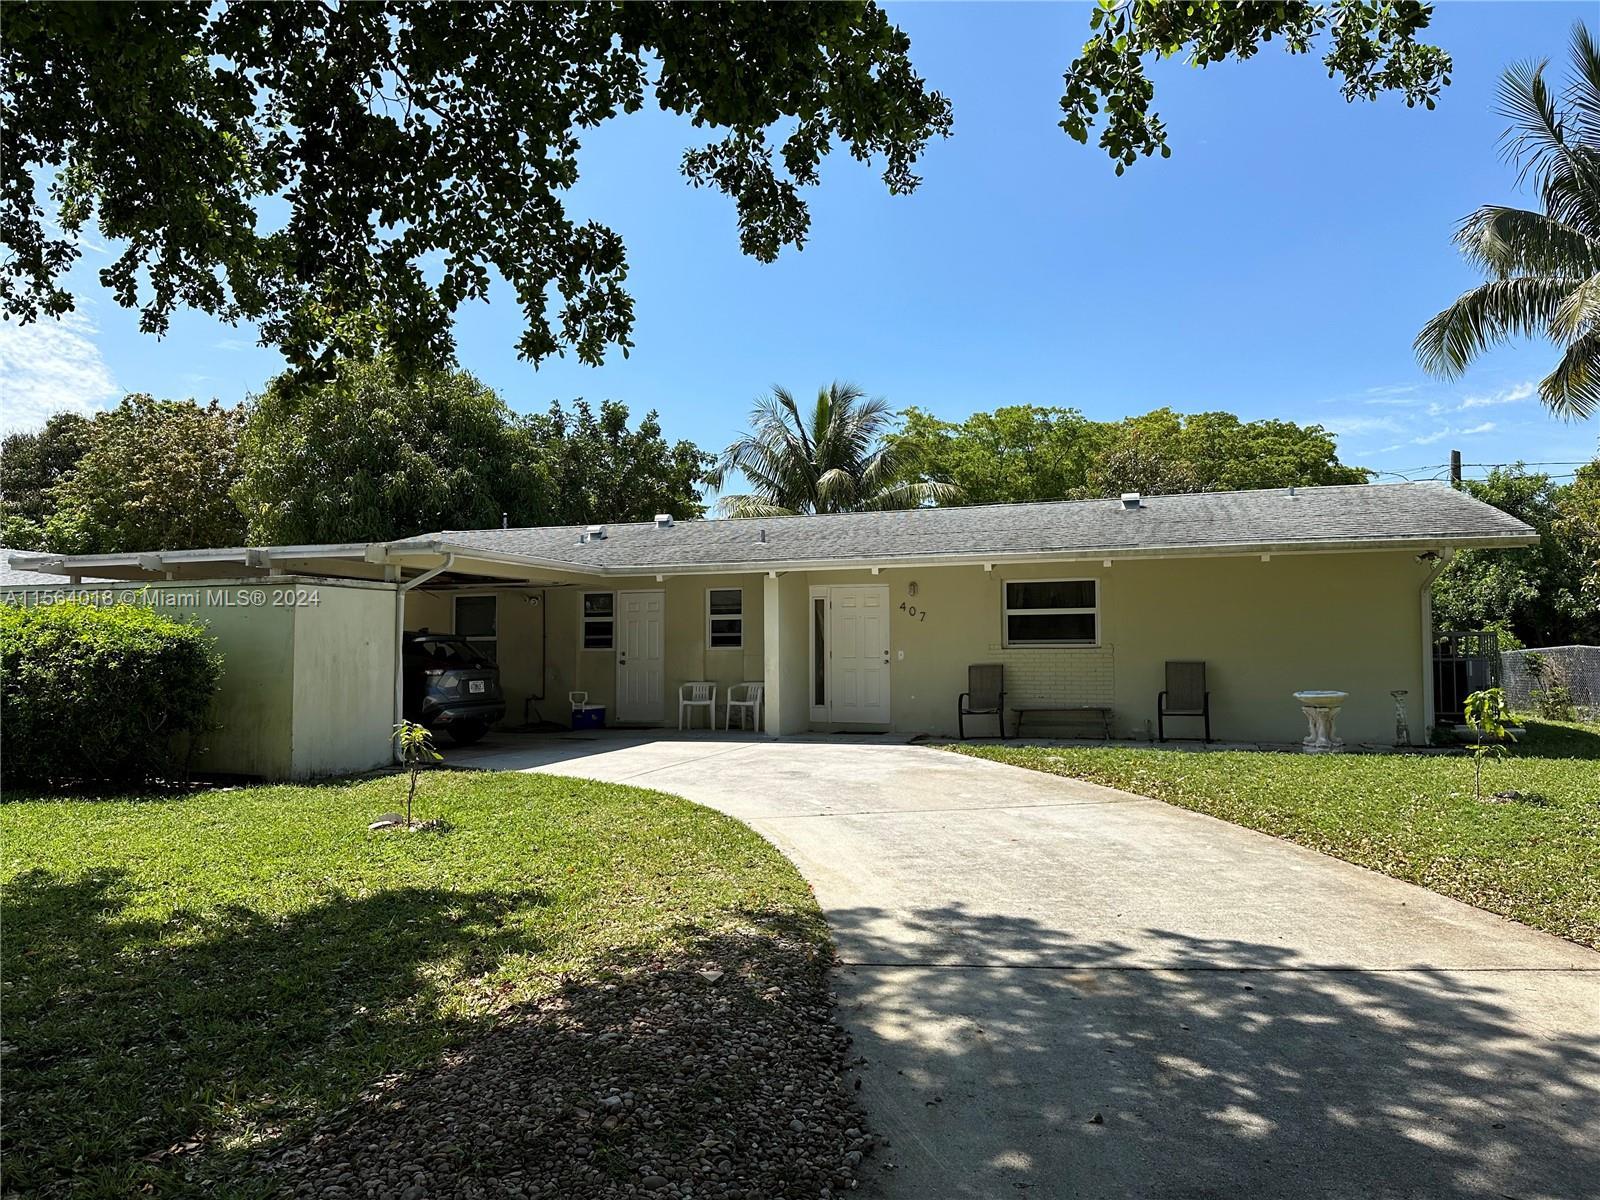 Photo of 407 Ontario Pl in West Palm Beach, FL